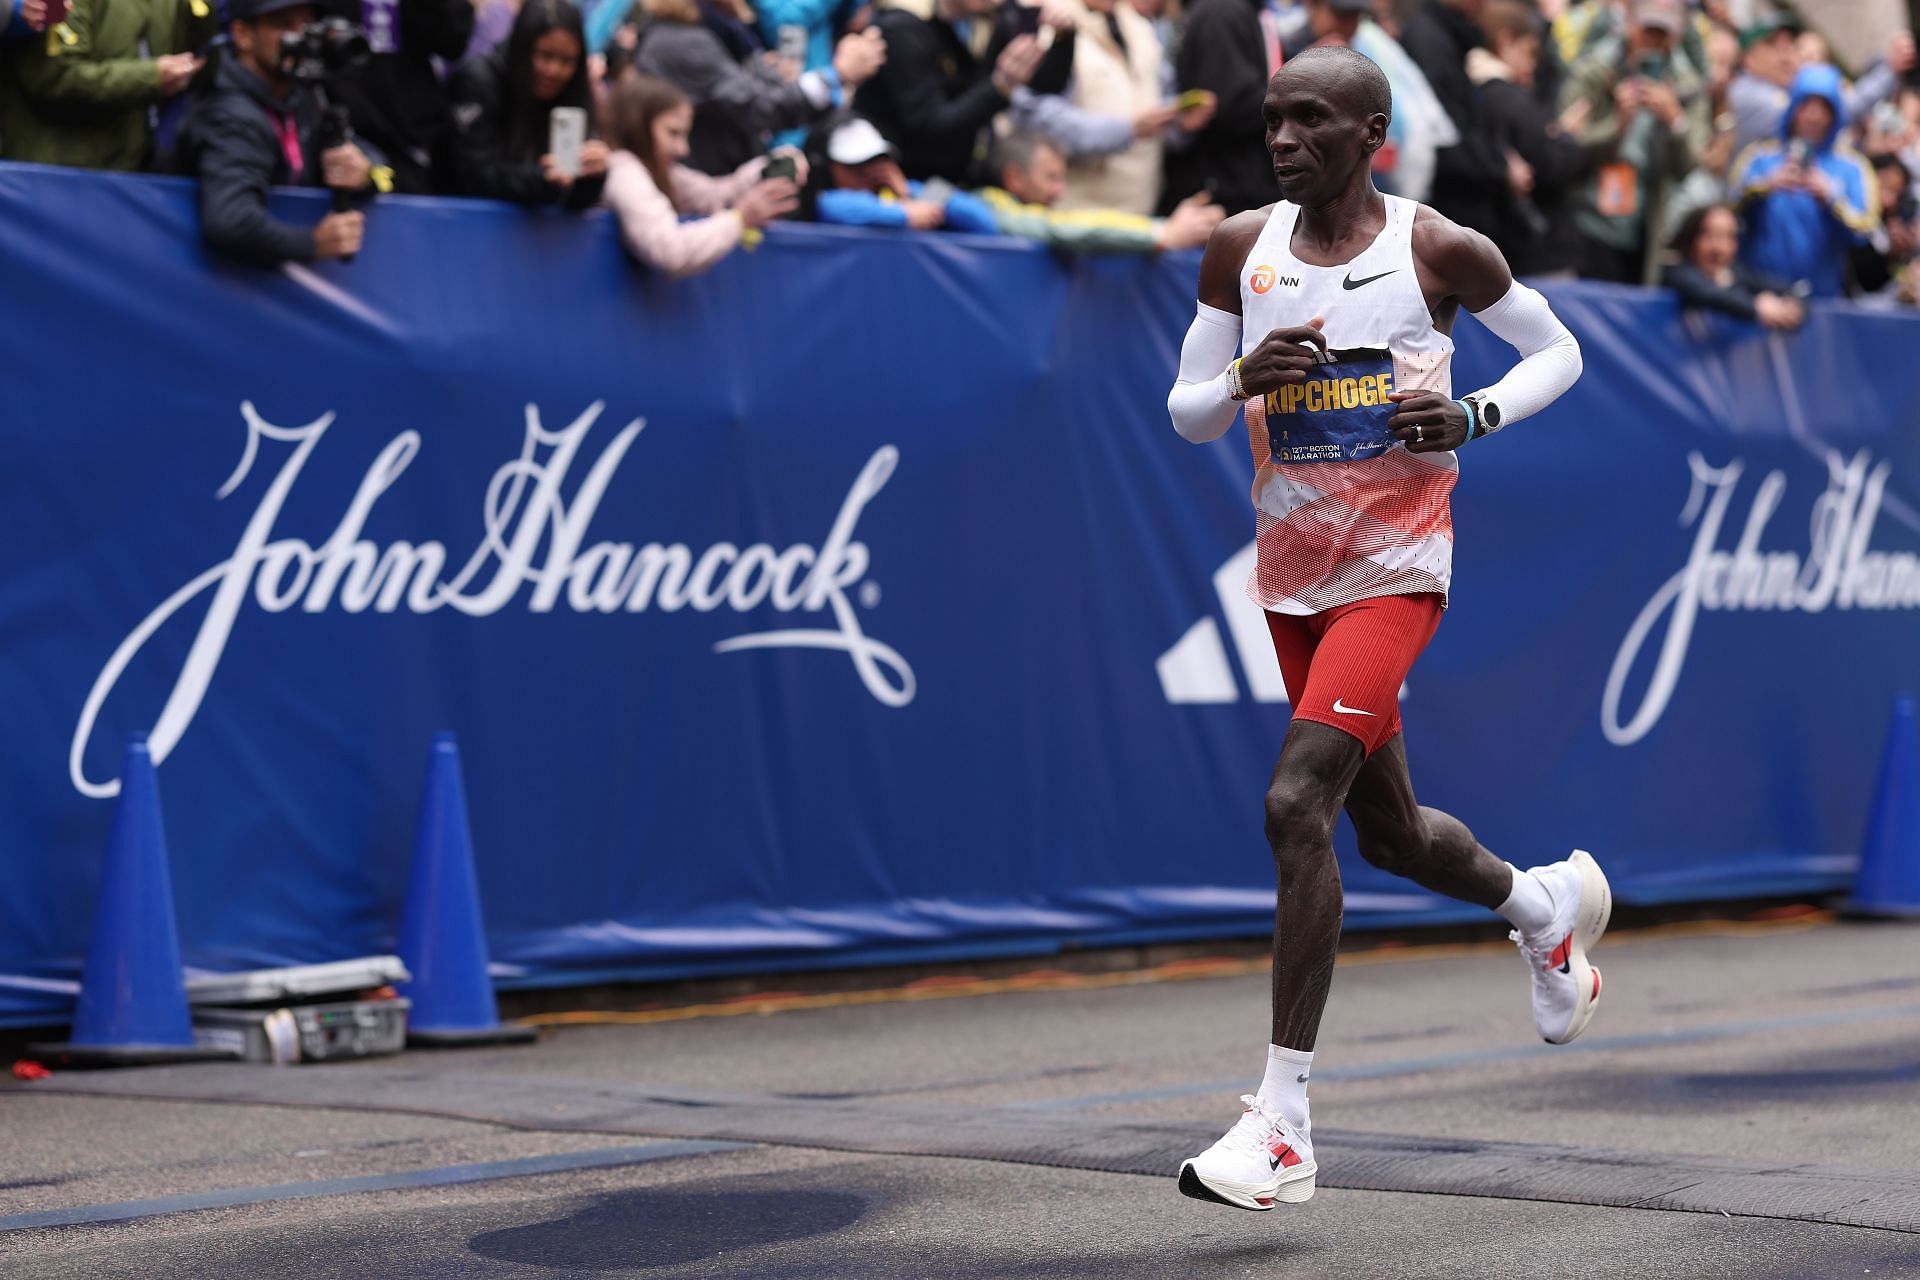 Eliud Kipchoge is keen for a gold medal at the upcoming Paris Olympics.